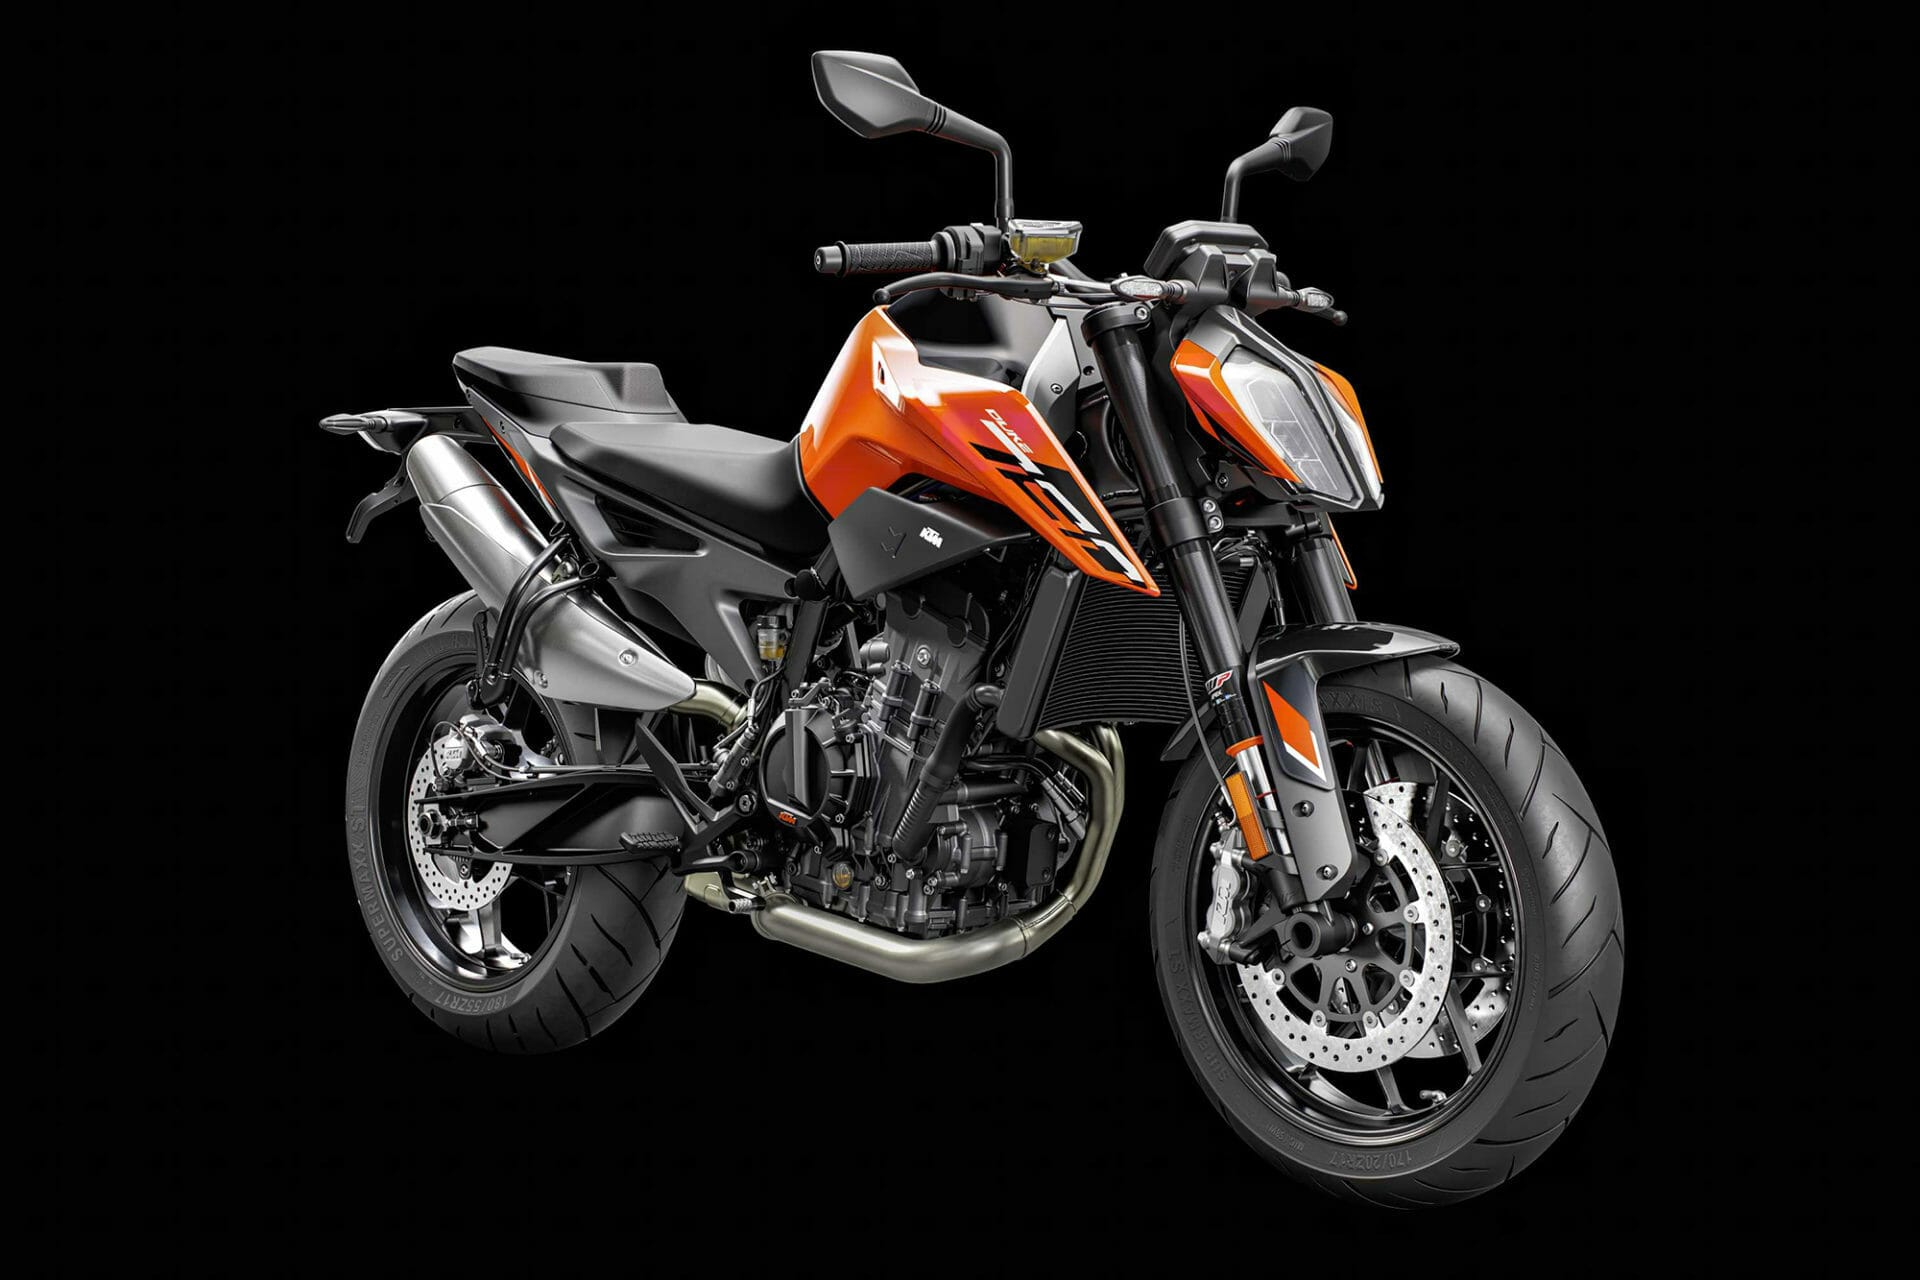 New 790 Duke for 2022 - KTM re-sharpens the Scalpel
- also in the MOTORCYCLES.NEWS APP